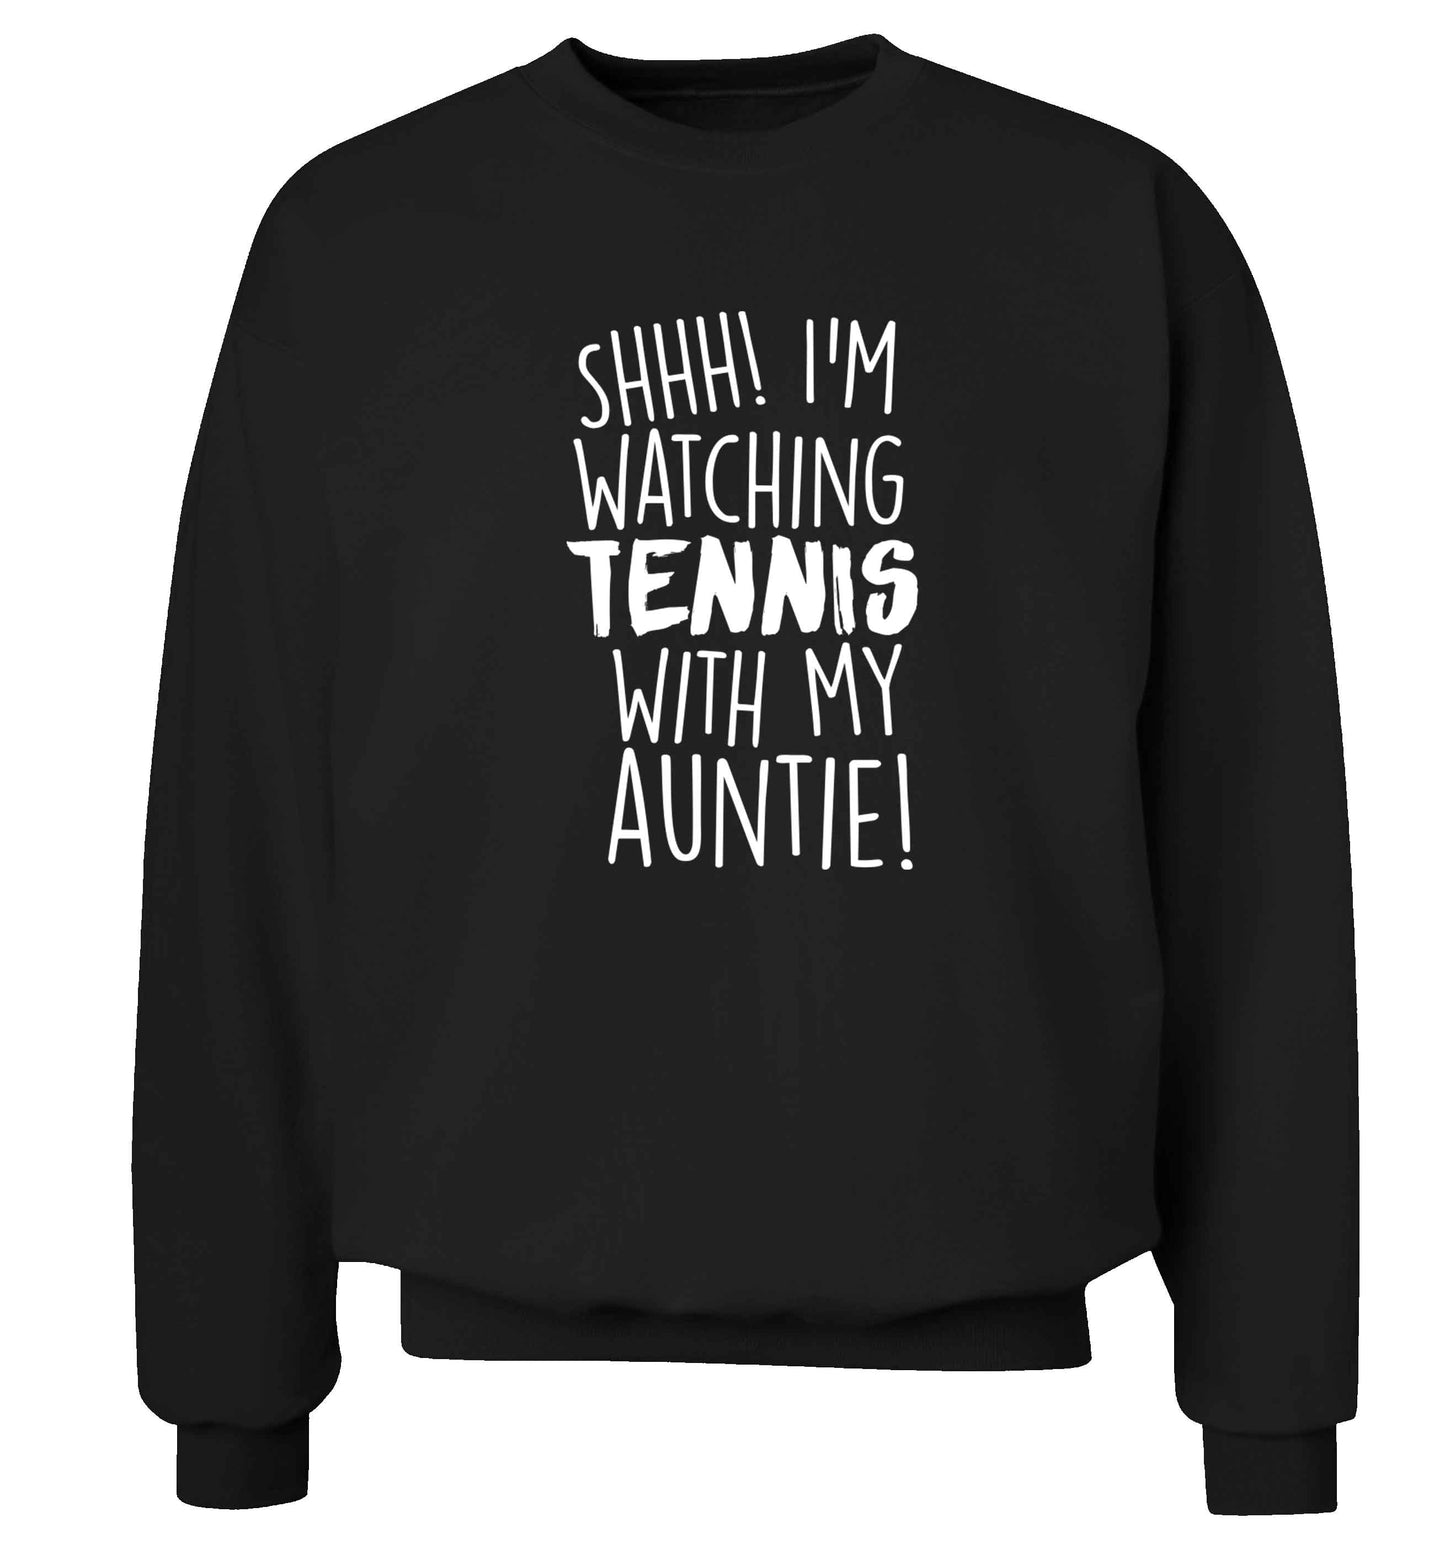 Shh! I'm watching tennis with my auntie! Adult's unisex black Sweater 2XL